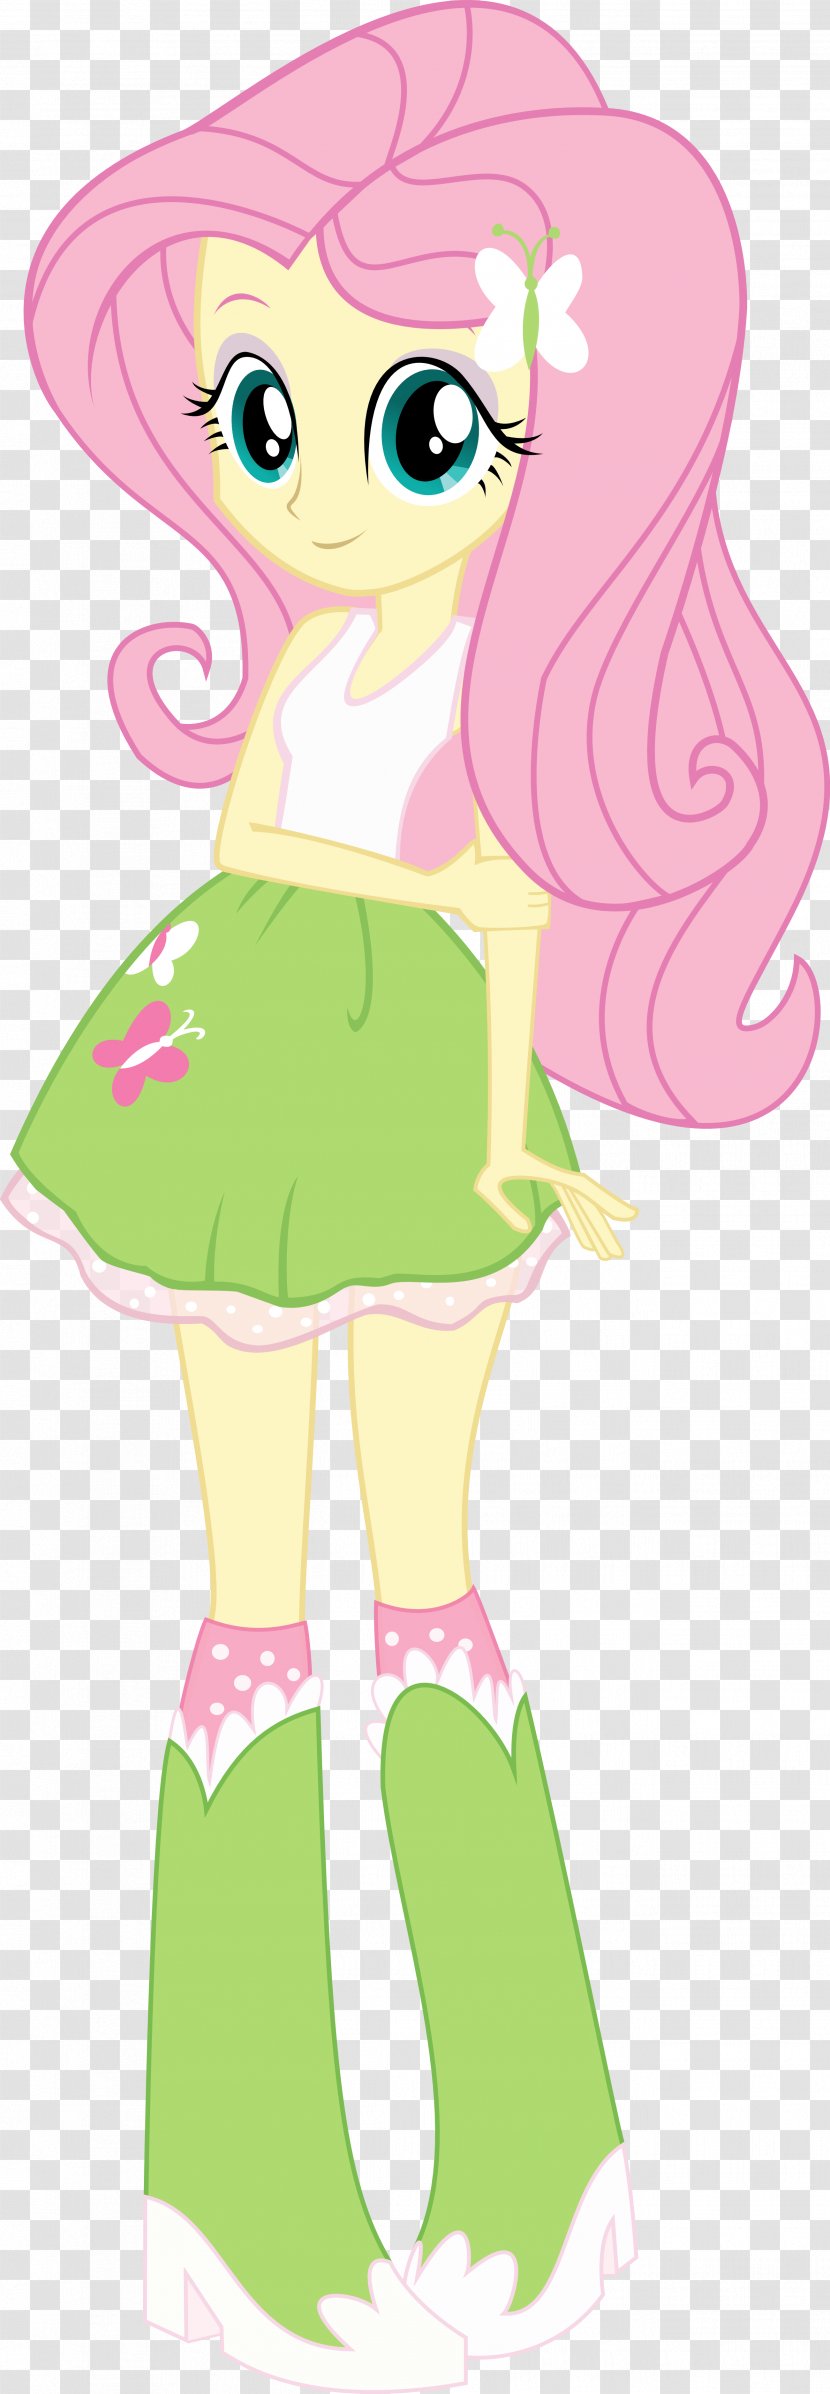 Fluttershy Pinkie Pie Applejack Twilight Sparkle Rainbow Dash - Heart - And The Knuckles Transparent PNG